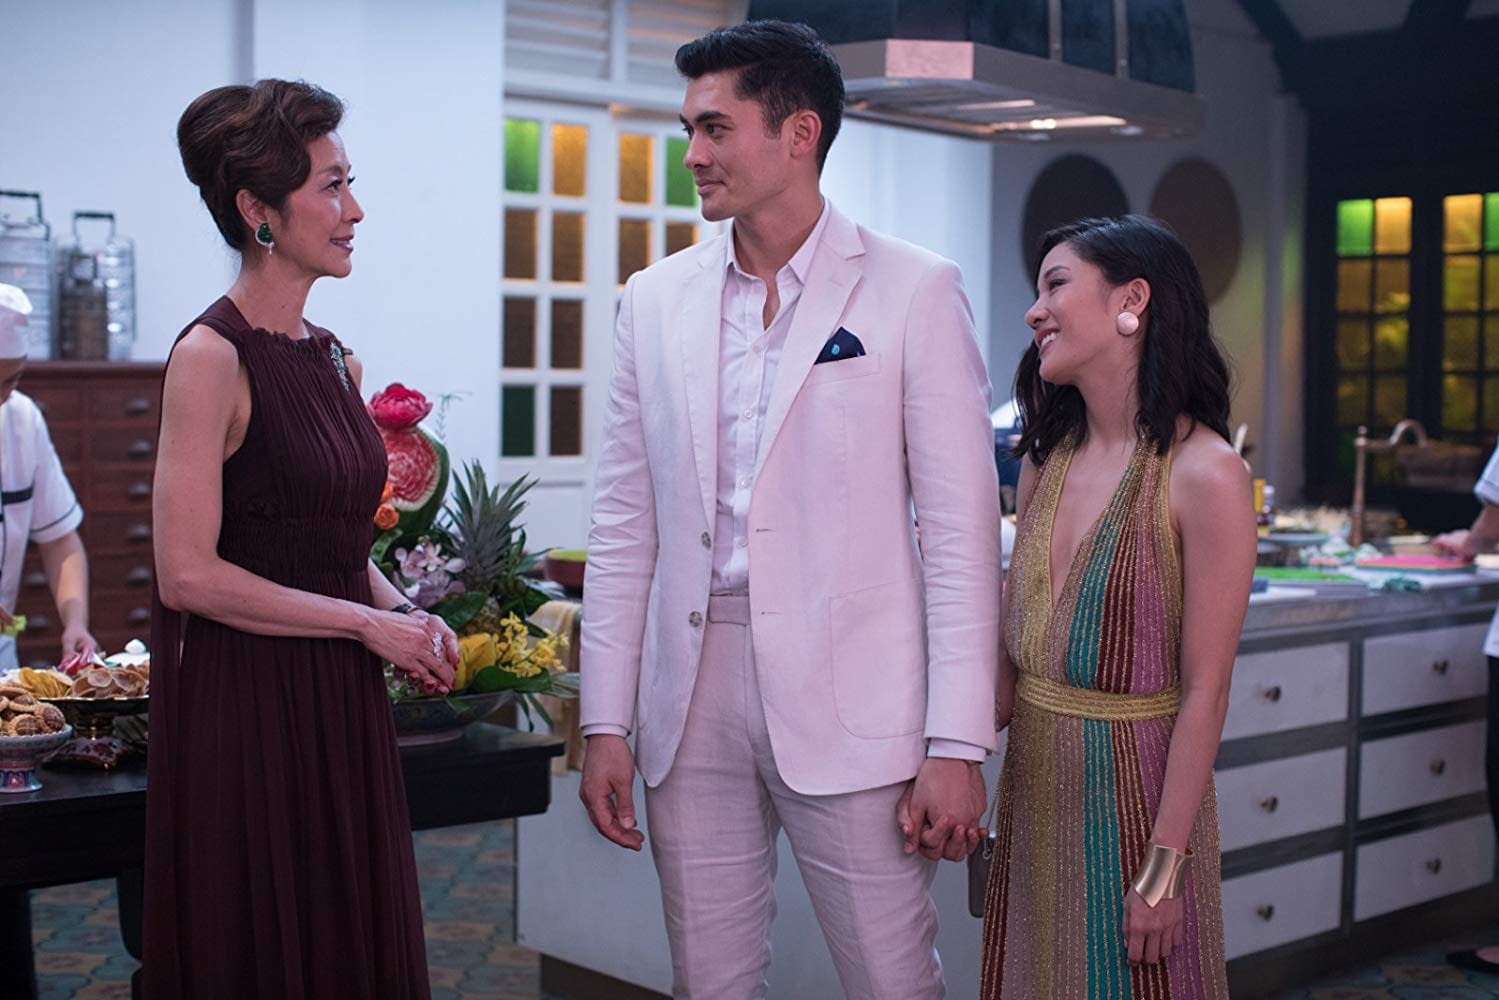 To Nobody's Surprise, Crazy Rich Asians Bombs in China